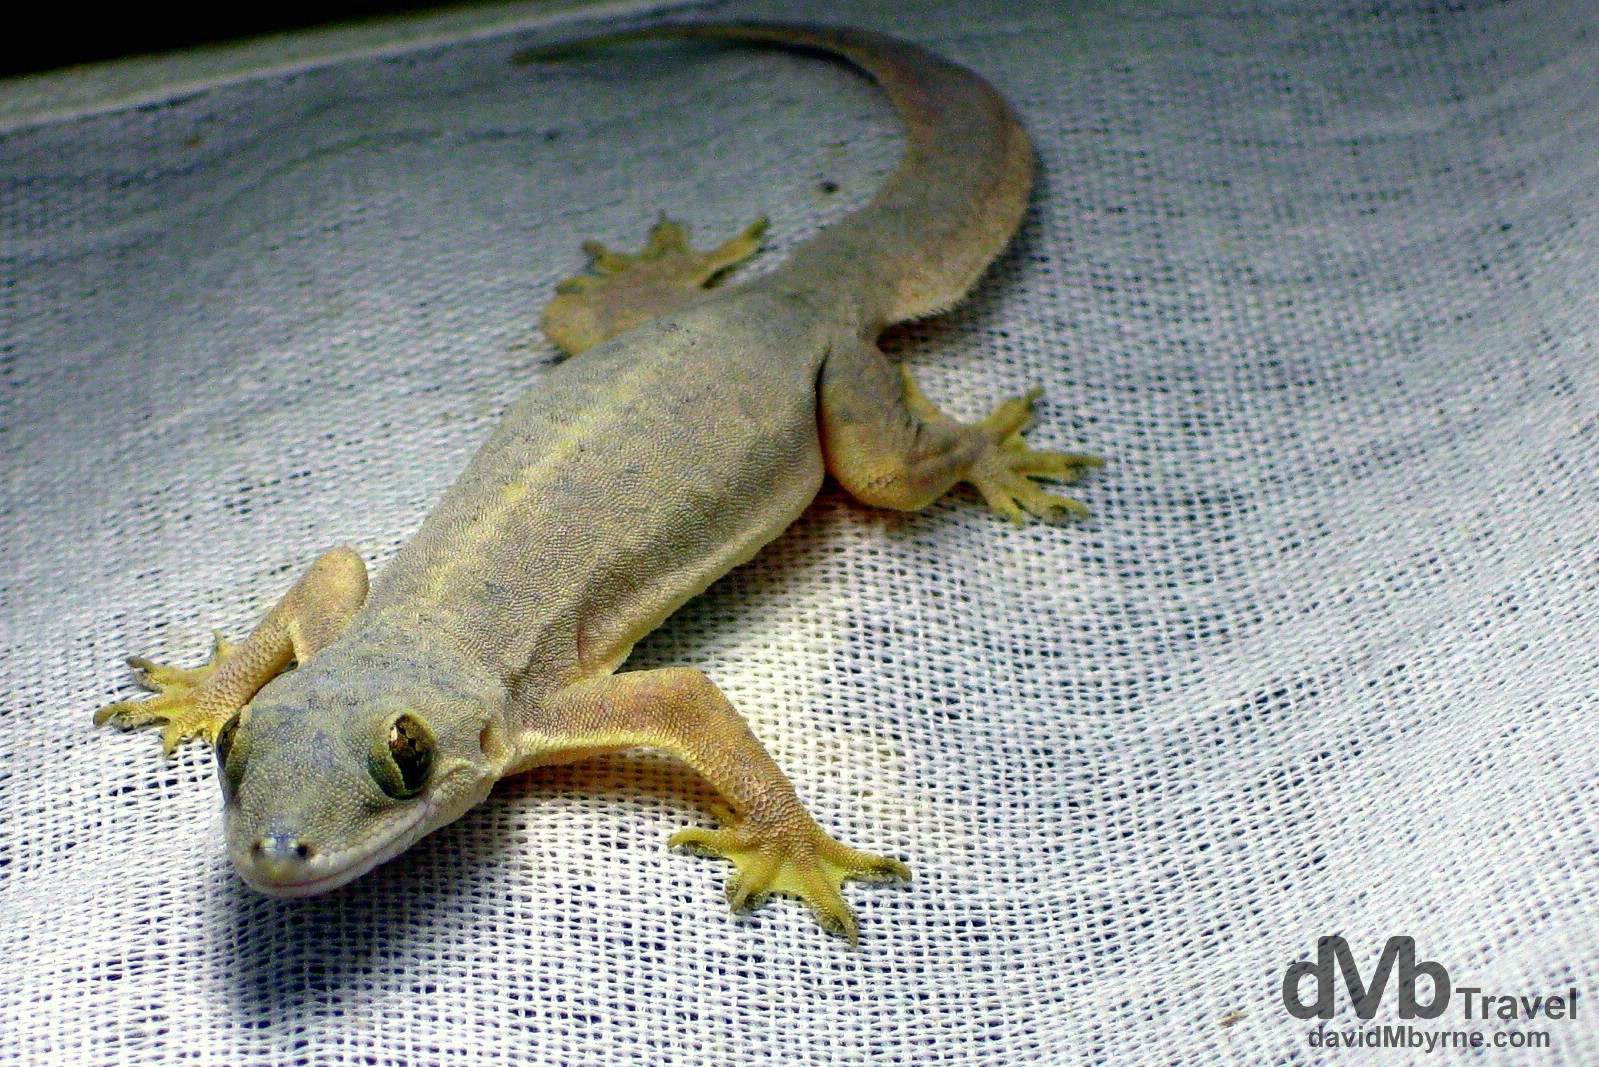 My then 3-month-old SLR was stolen on my first full day on the Philippine island of Boracay so for the rest of my time on the holiday island found myself using my IXUS point-and-shoot, including here when photographing this cute little gecko on the inside of a lampshade. Boracay Island, Philippines. September 24th 2011.